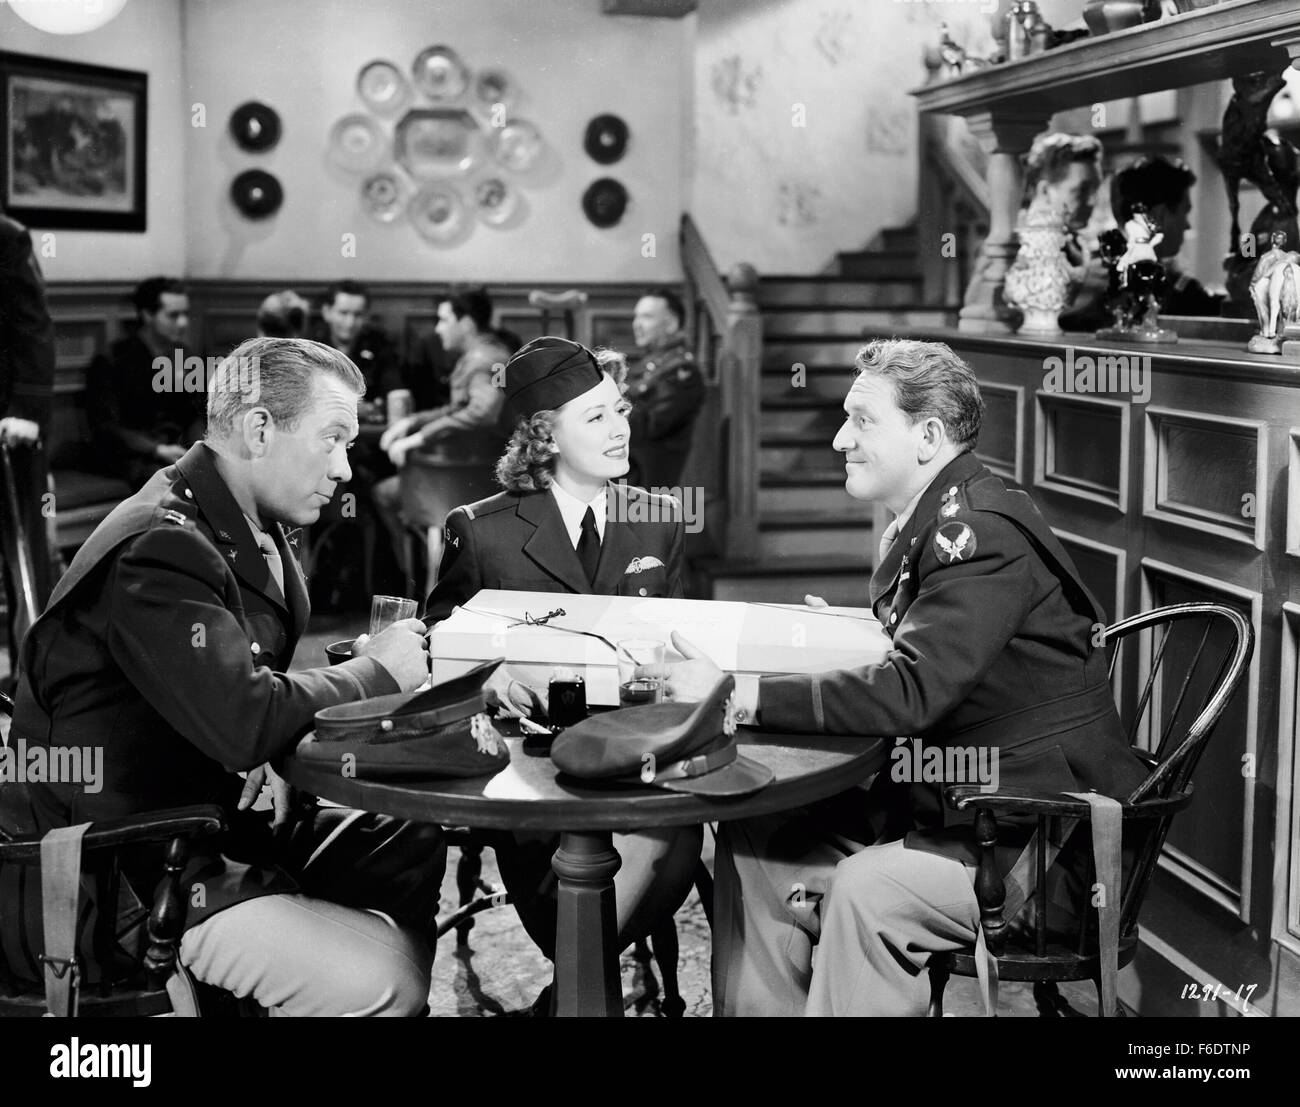 RELEASE DATE: December 24, 1943. MOVIE TITLE: A Guy Named Joe. STUDIO: Metro-Goldwyn-Mayer (MGM). PLOT: A sentimental, patriotic (if not propagandistic) Hollywood fantasy about a dead World War II bomber pilot, Maj. Pete Sandidge who becomes guardian angel to another pilot, Capt. Ted Randall, guiding Randall through battle and helping him to romance his old girlfriend, despite her excessive devotion to Sandidge's memory. PICTURED: SPENCER TRACY as Pete Sandidge and IRENE DUNNE as Dorinda Durston. Stock Photo